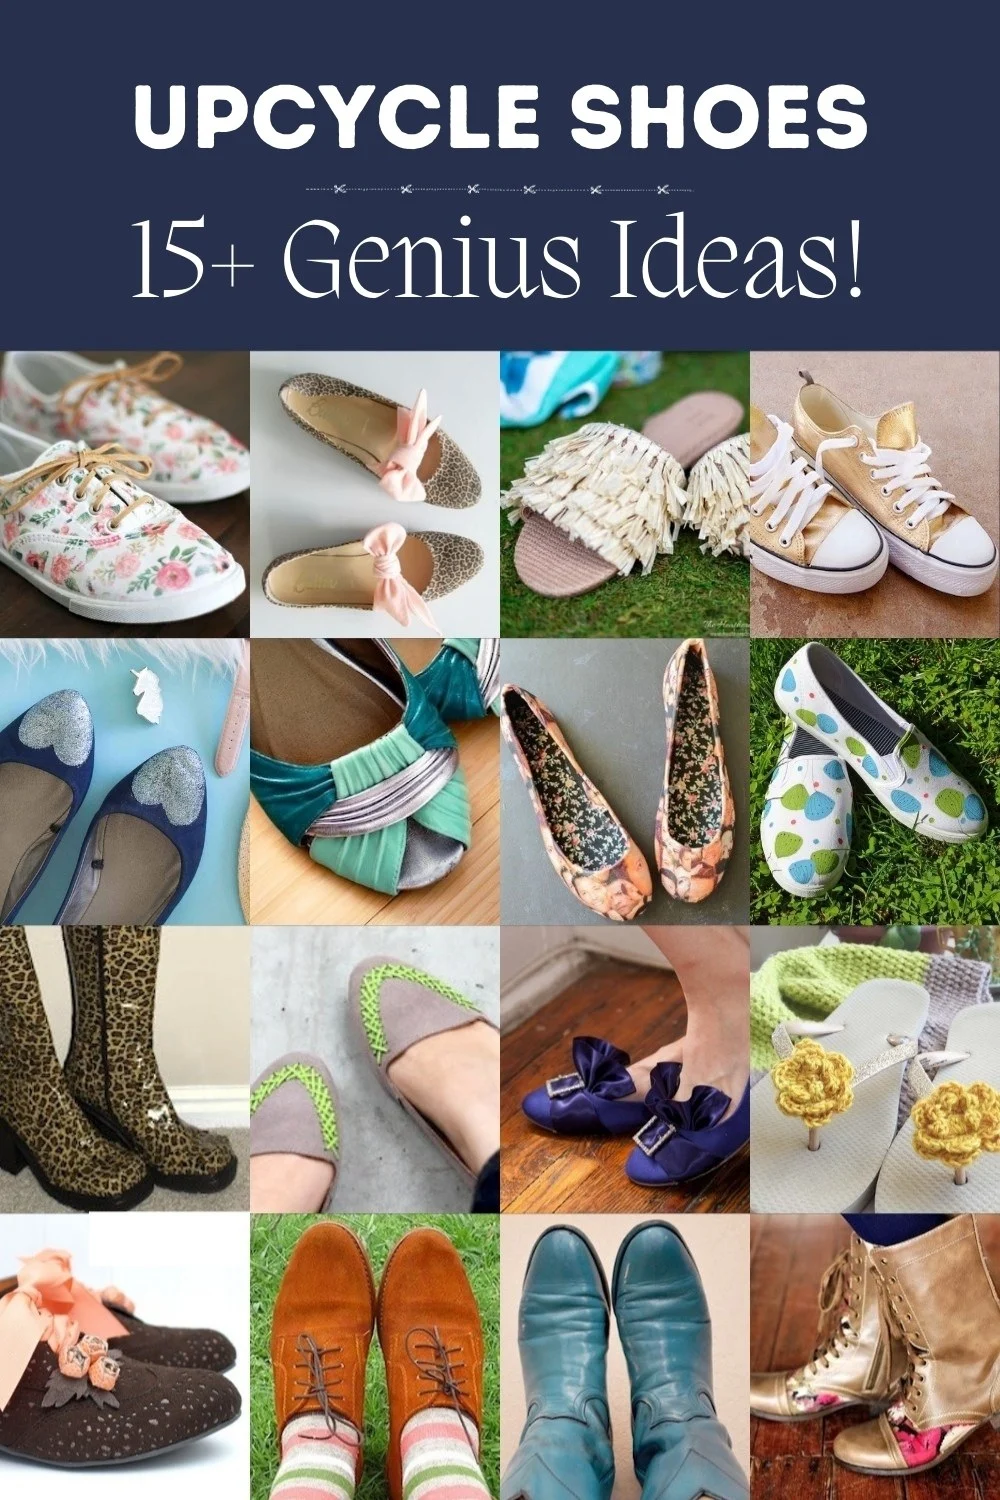 Pin by Rebecca on Clothes making | Shoes, Groovy, Style